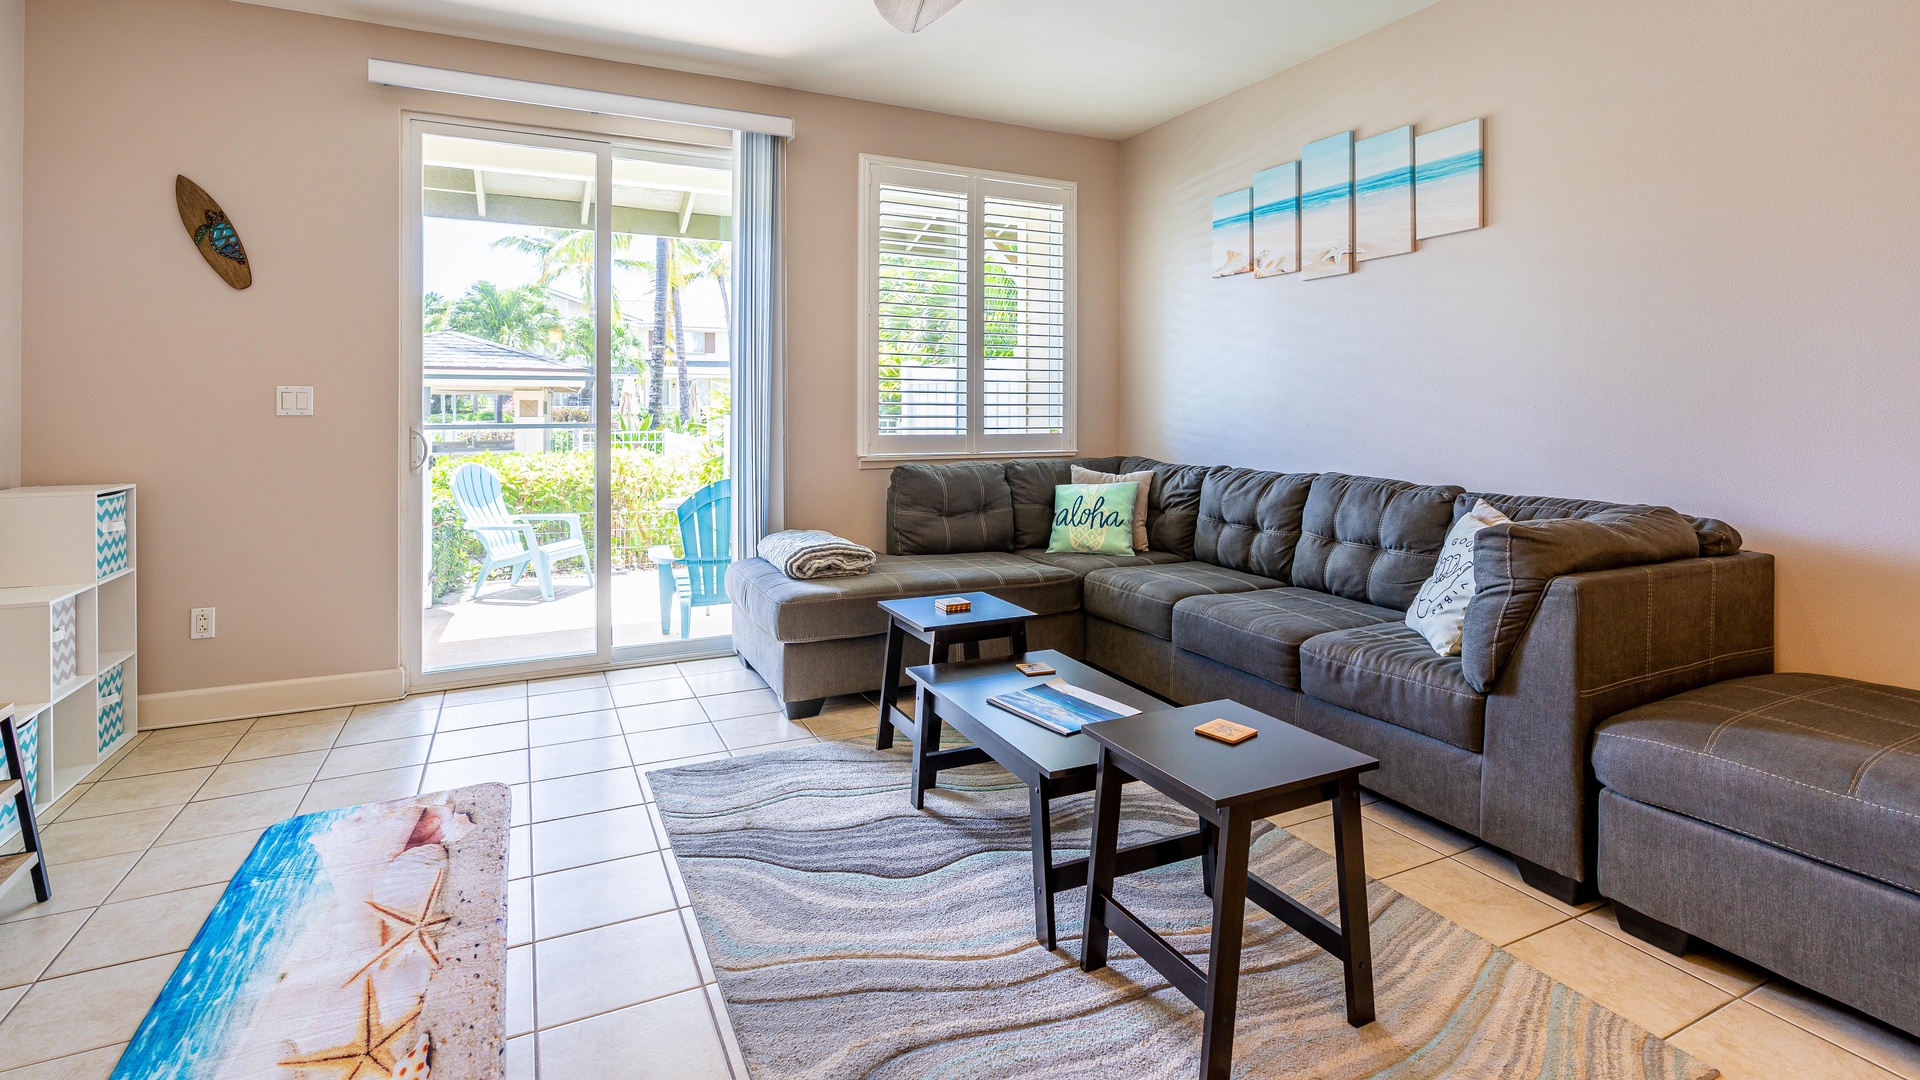 Kapolei Vacation Rentals, Hillside Villas 1508-2 - Sink into the plush seating in the living area surrounded by soft colorful decor.